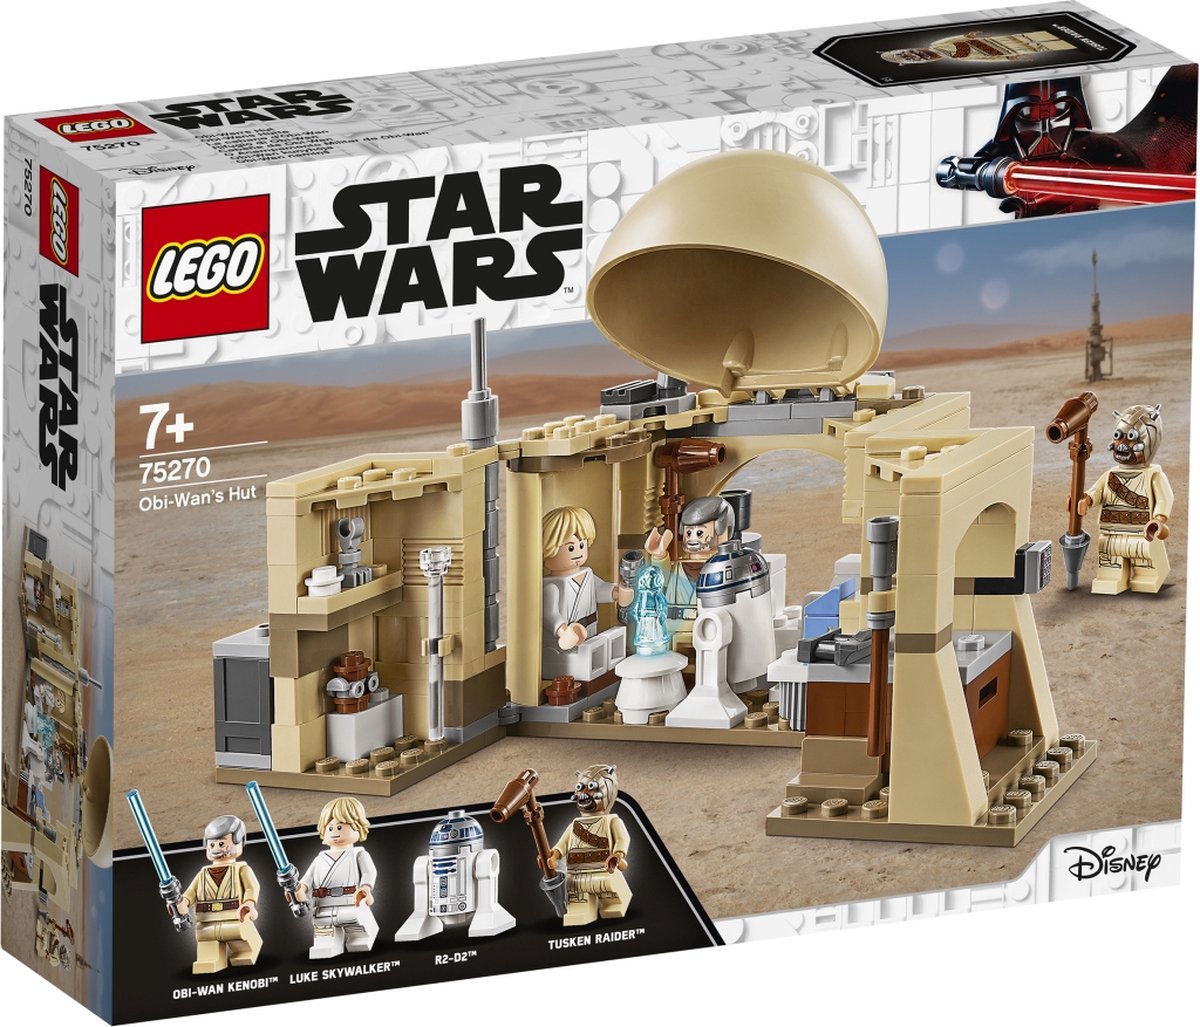 75200 île d'Ahch-To LEGO Star Wars pas cher - Lego - Achat moins cher